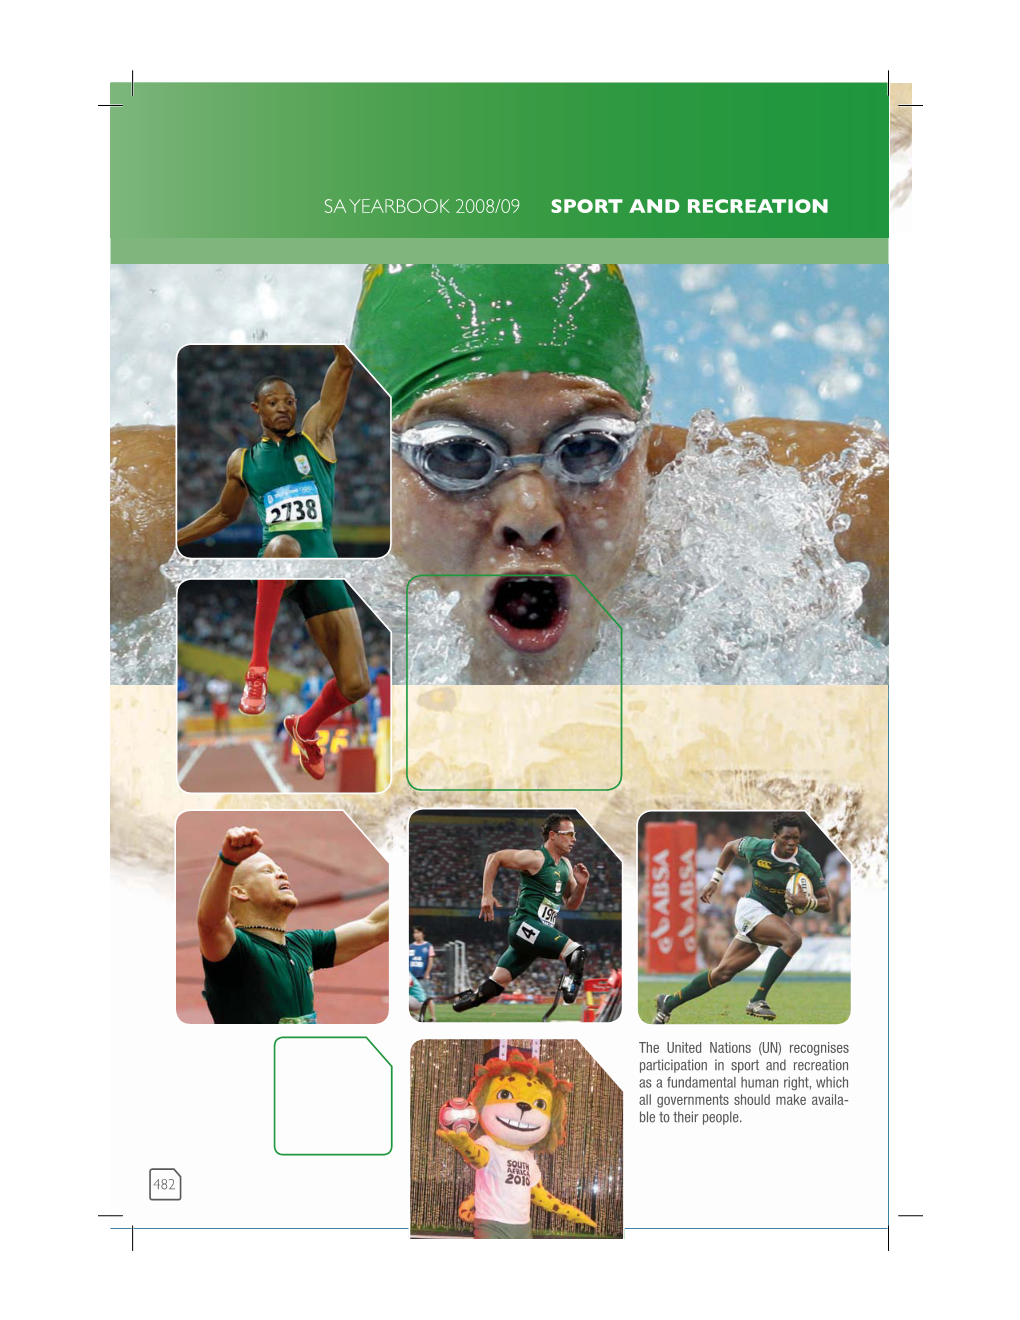 Sa Yearbook 2008/09 Sport and Recreation